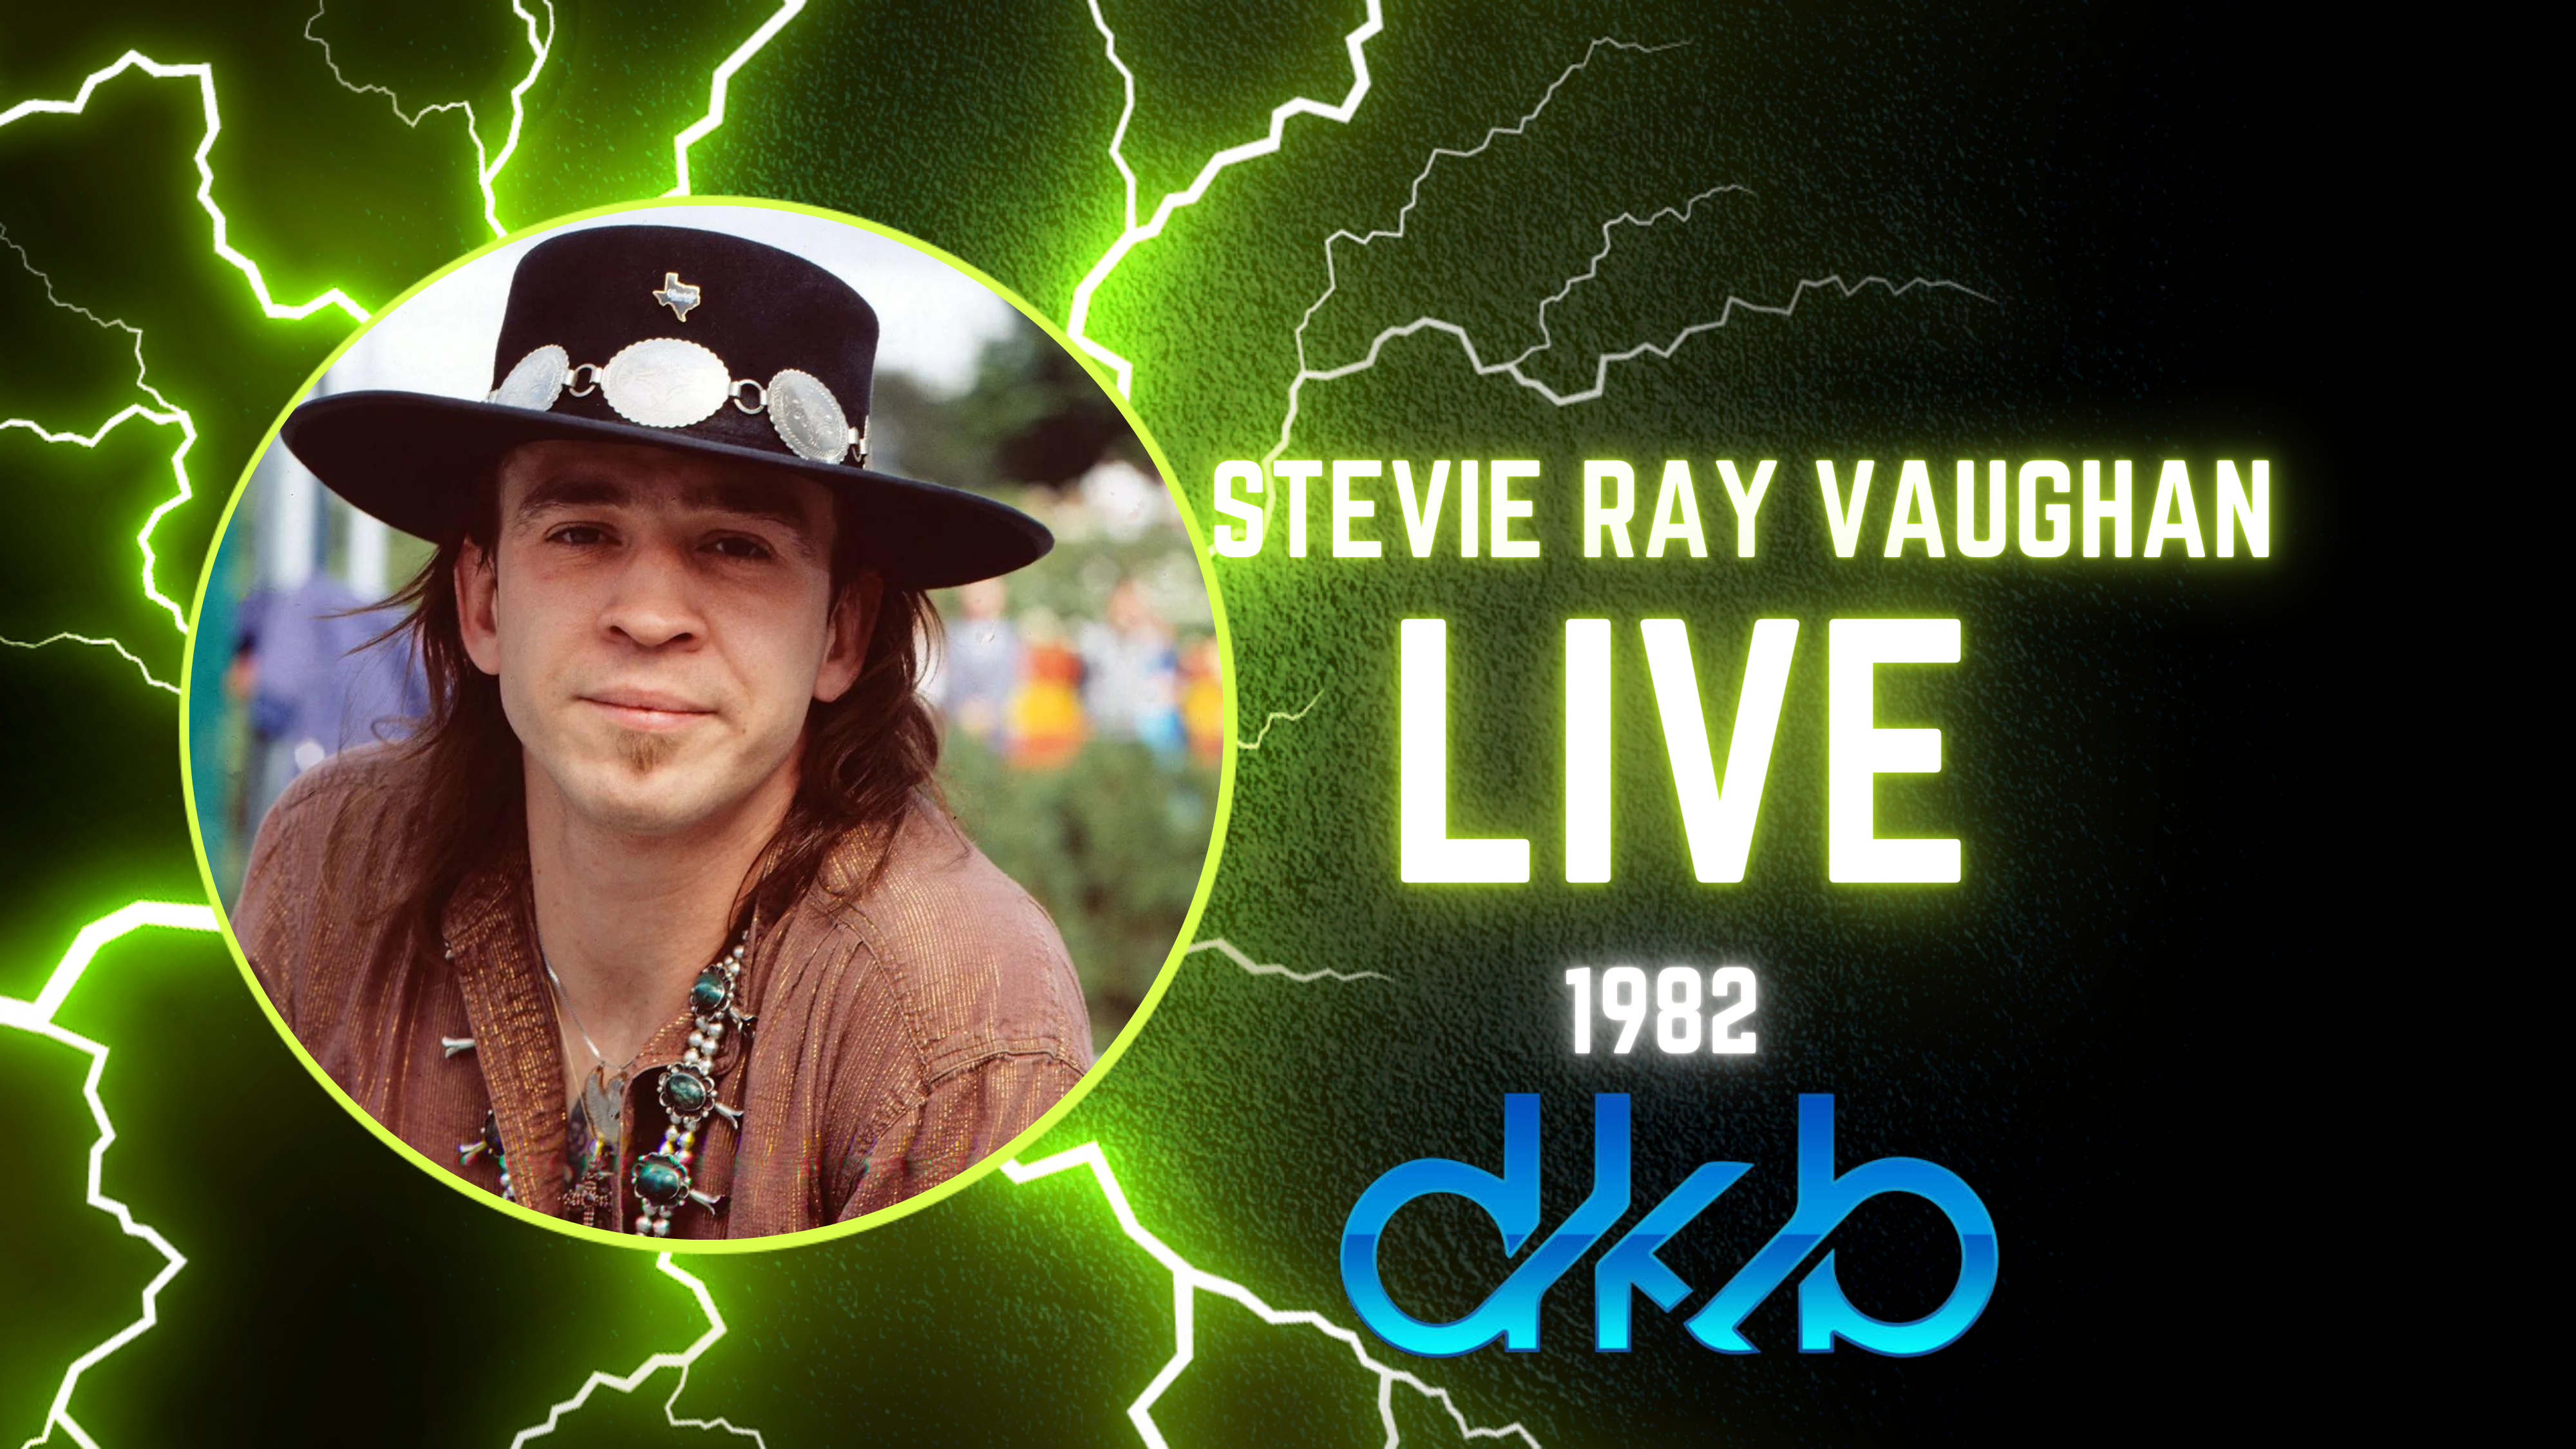 Stevie Ray Vaughan 1982 Performance: A Legendary Live Showcase of…